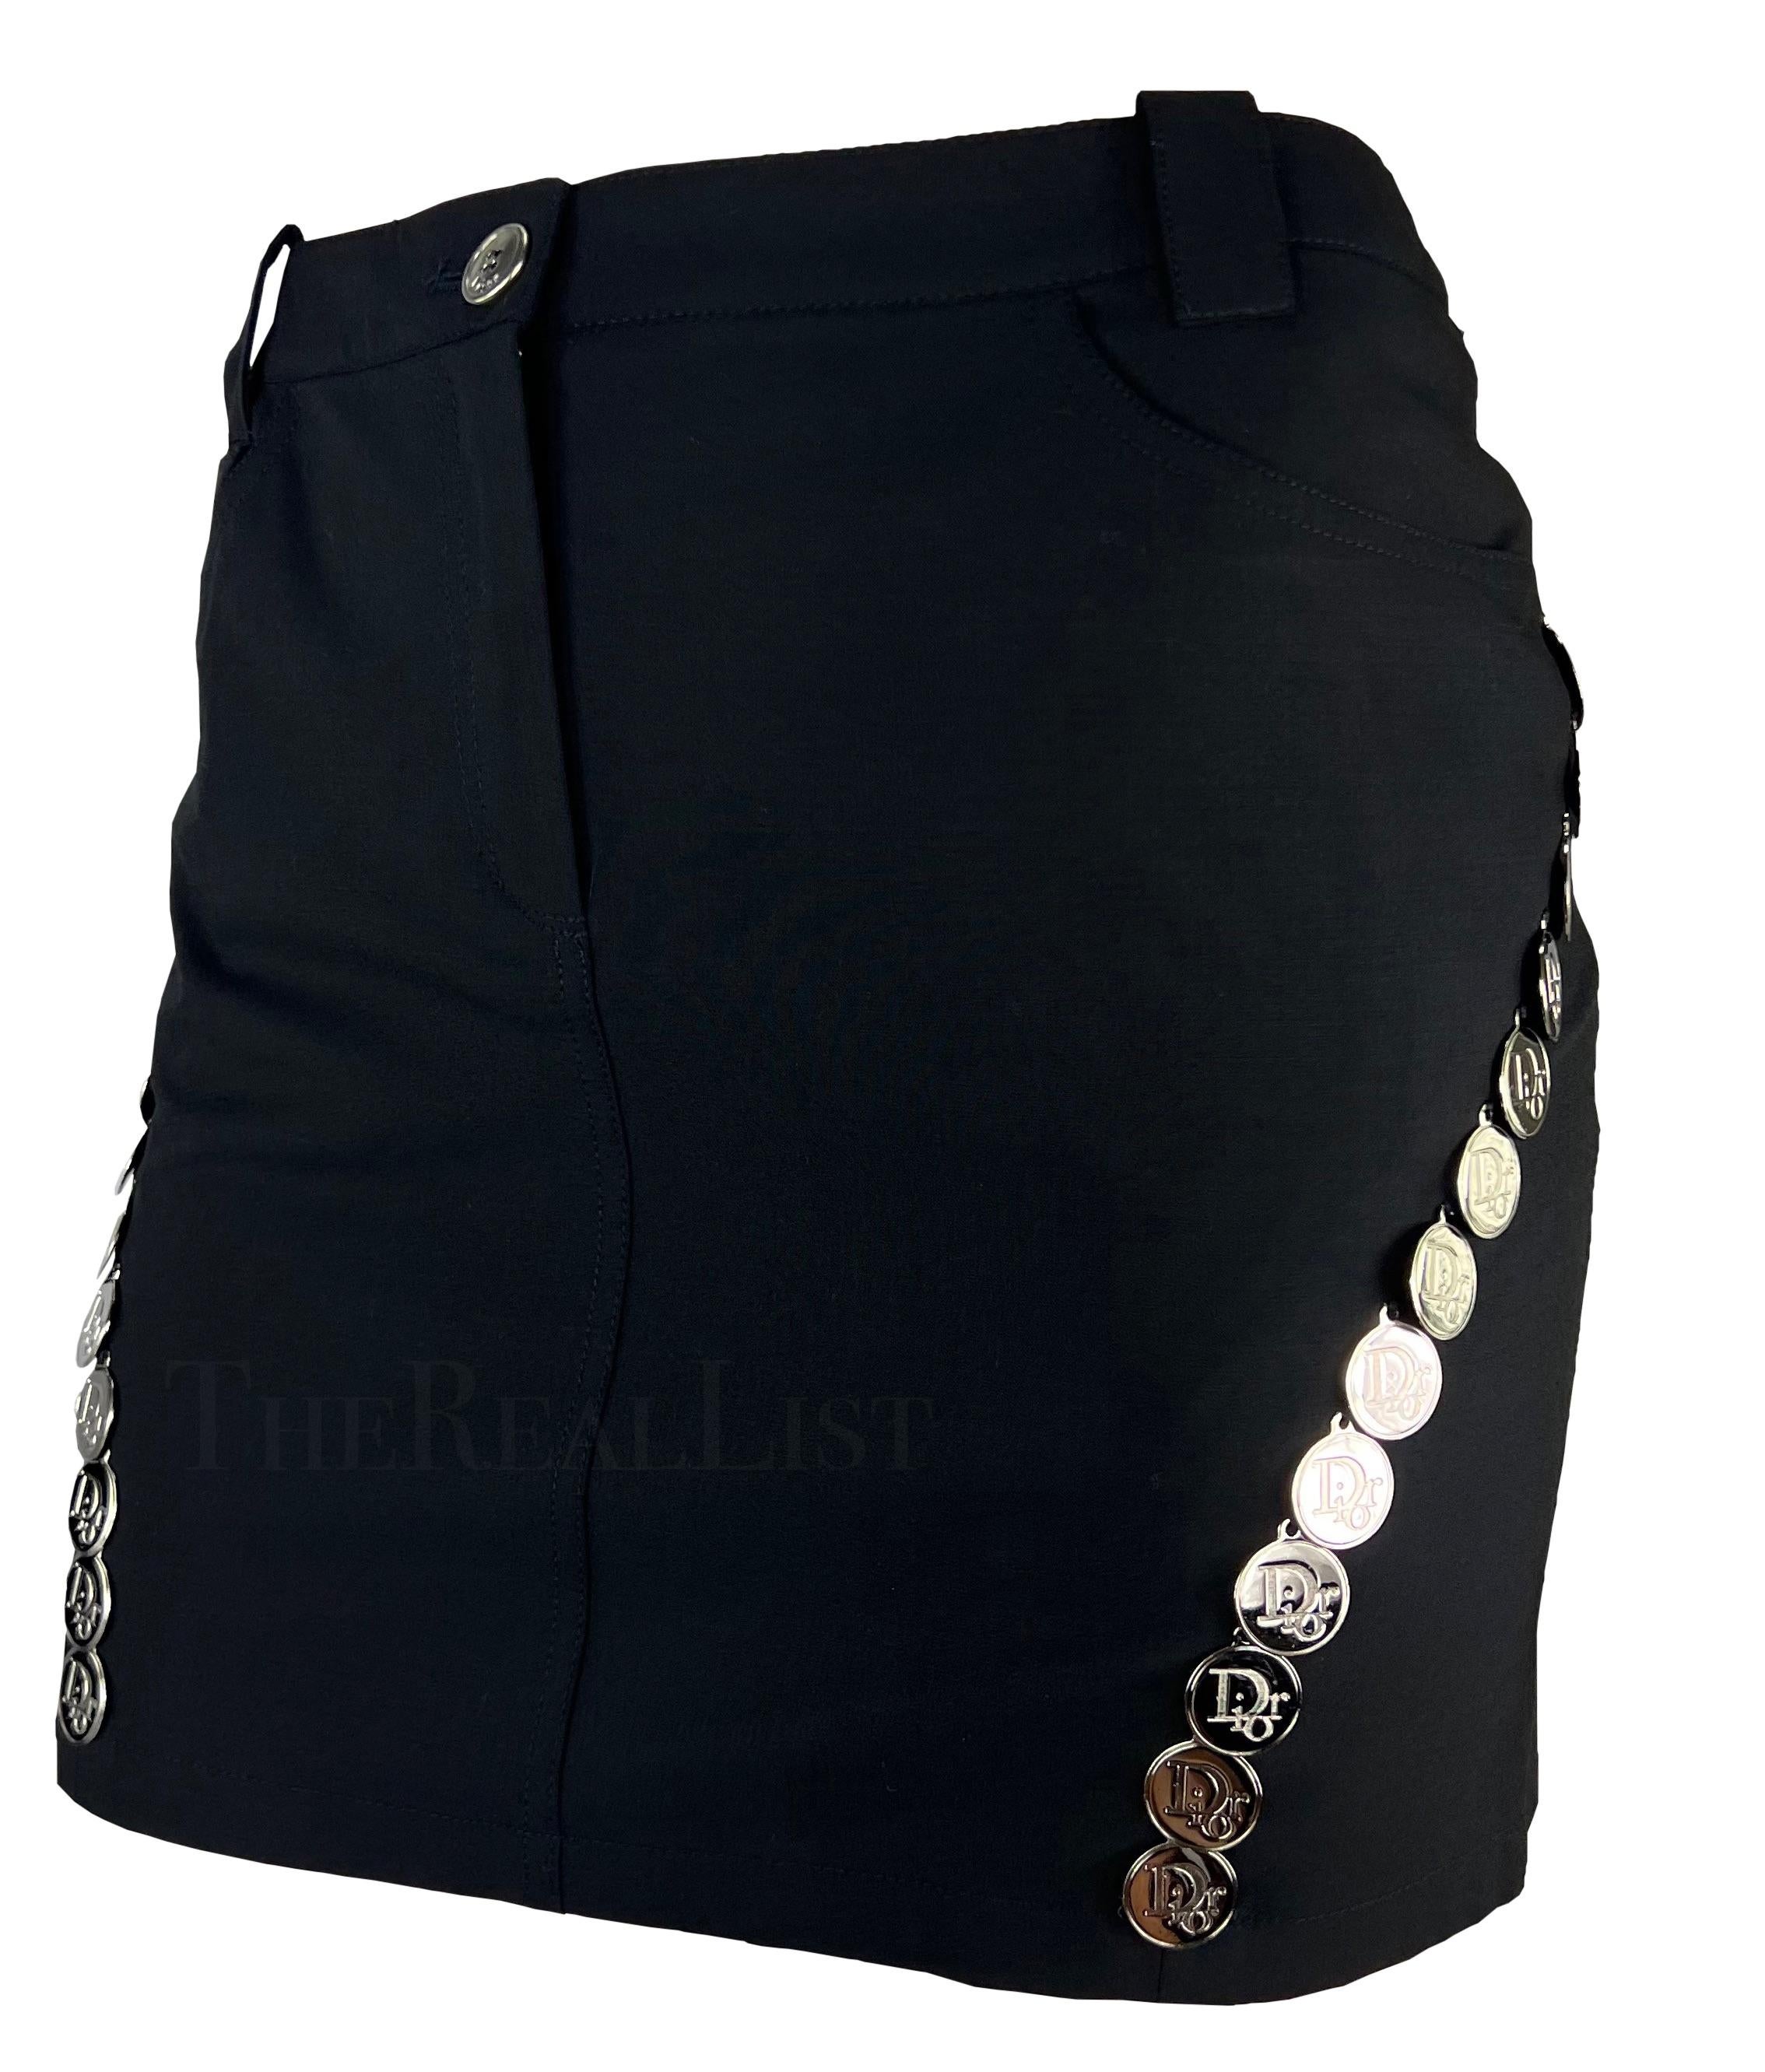 S/S 2004 Christian Dior Black Silver Logo Medallion Mini Skirt In Excellent Condition For Sale In West Hollywood, CA